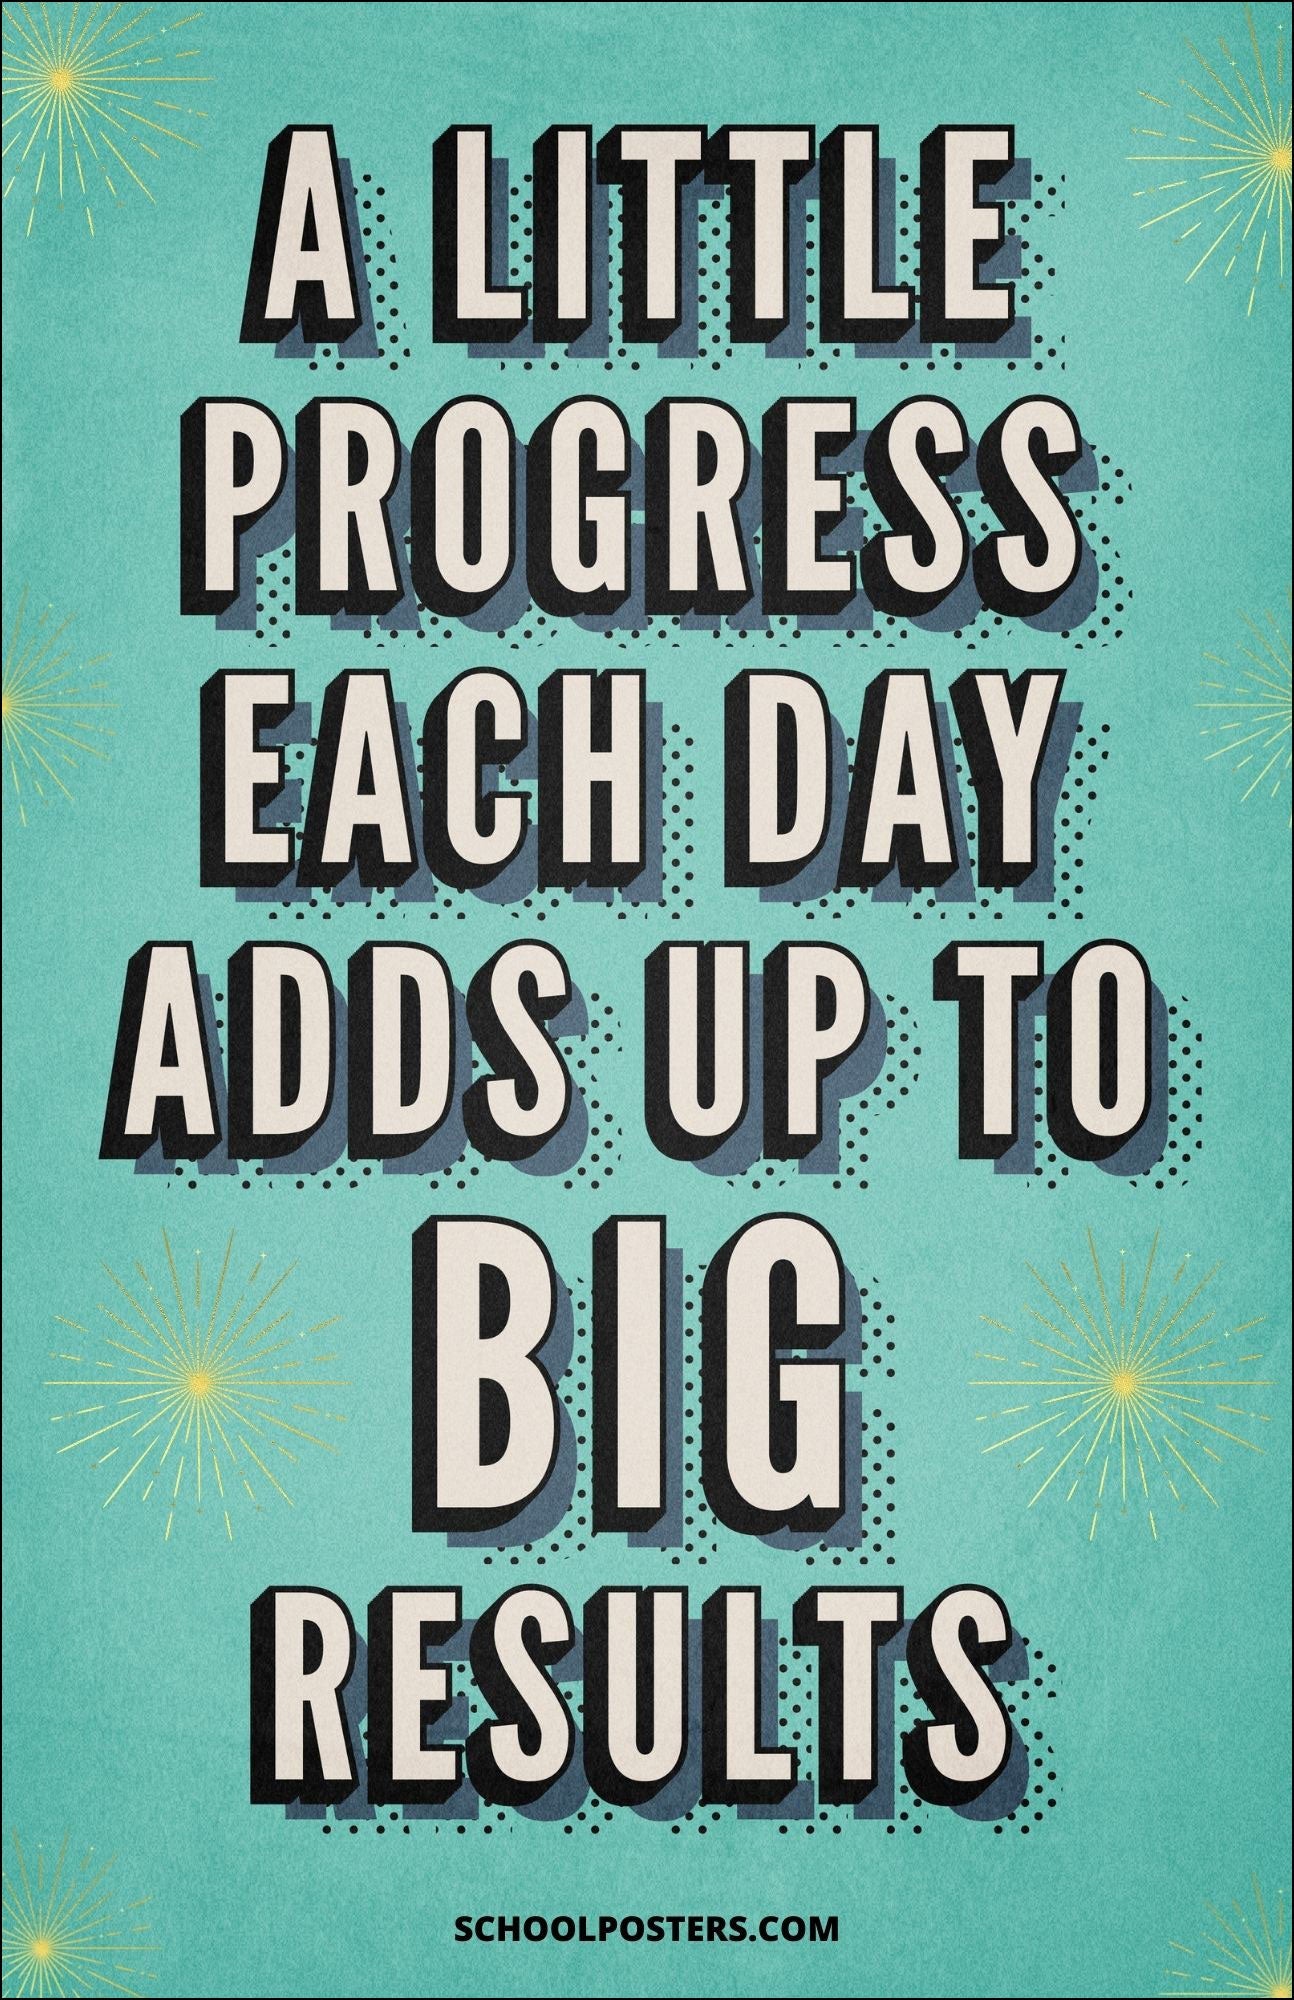 Progress Adds Up Poster